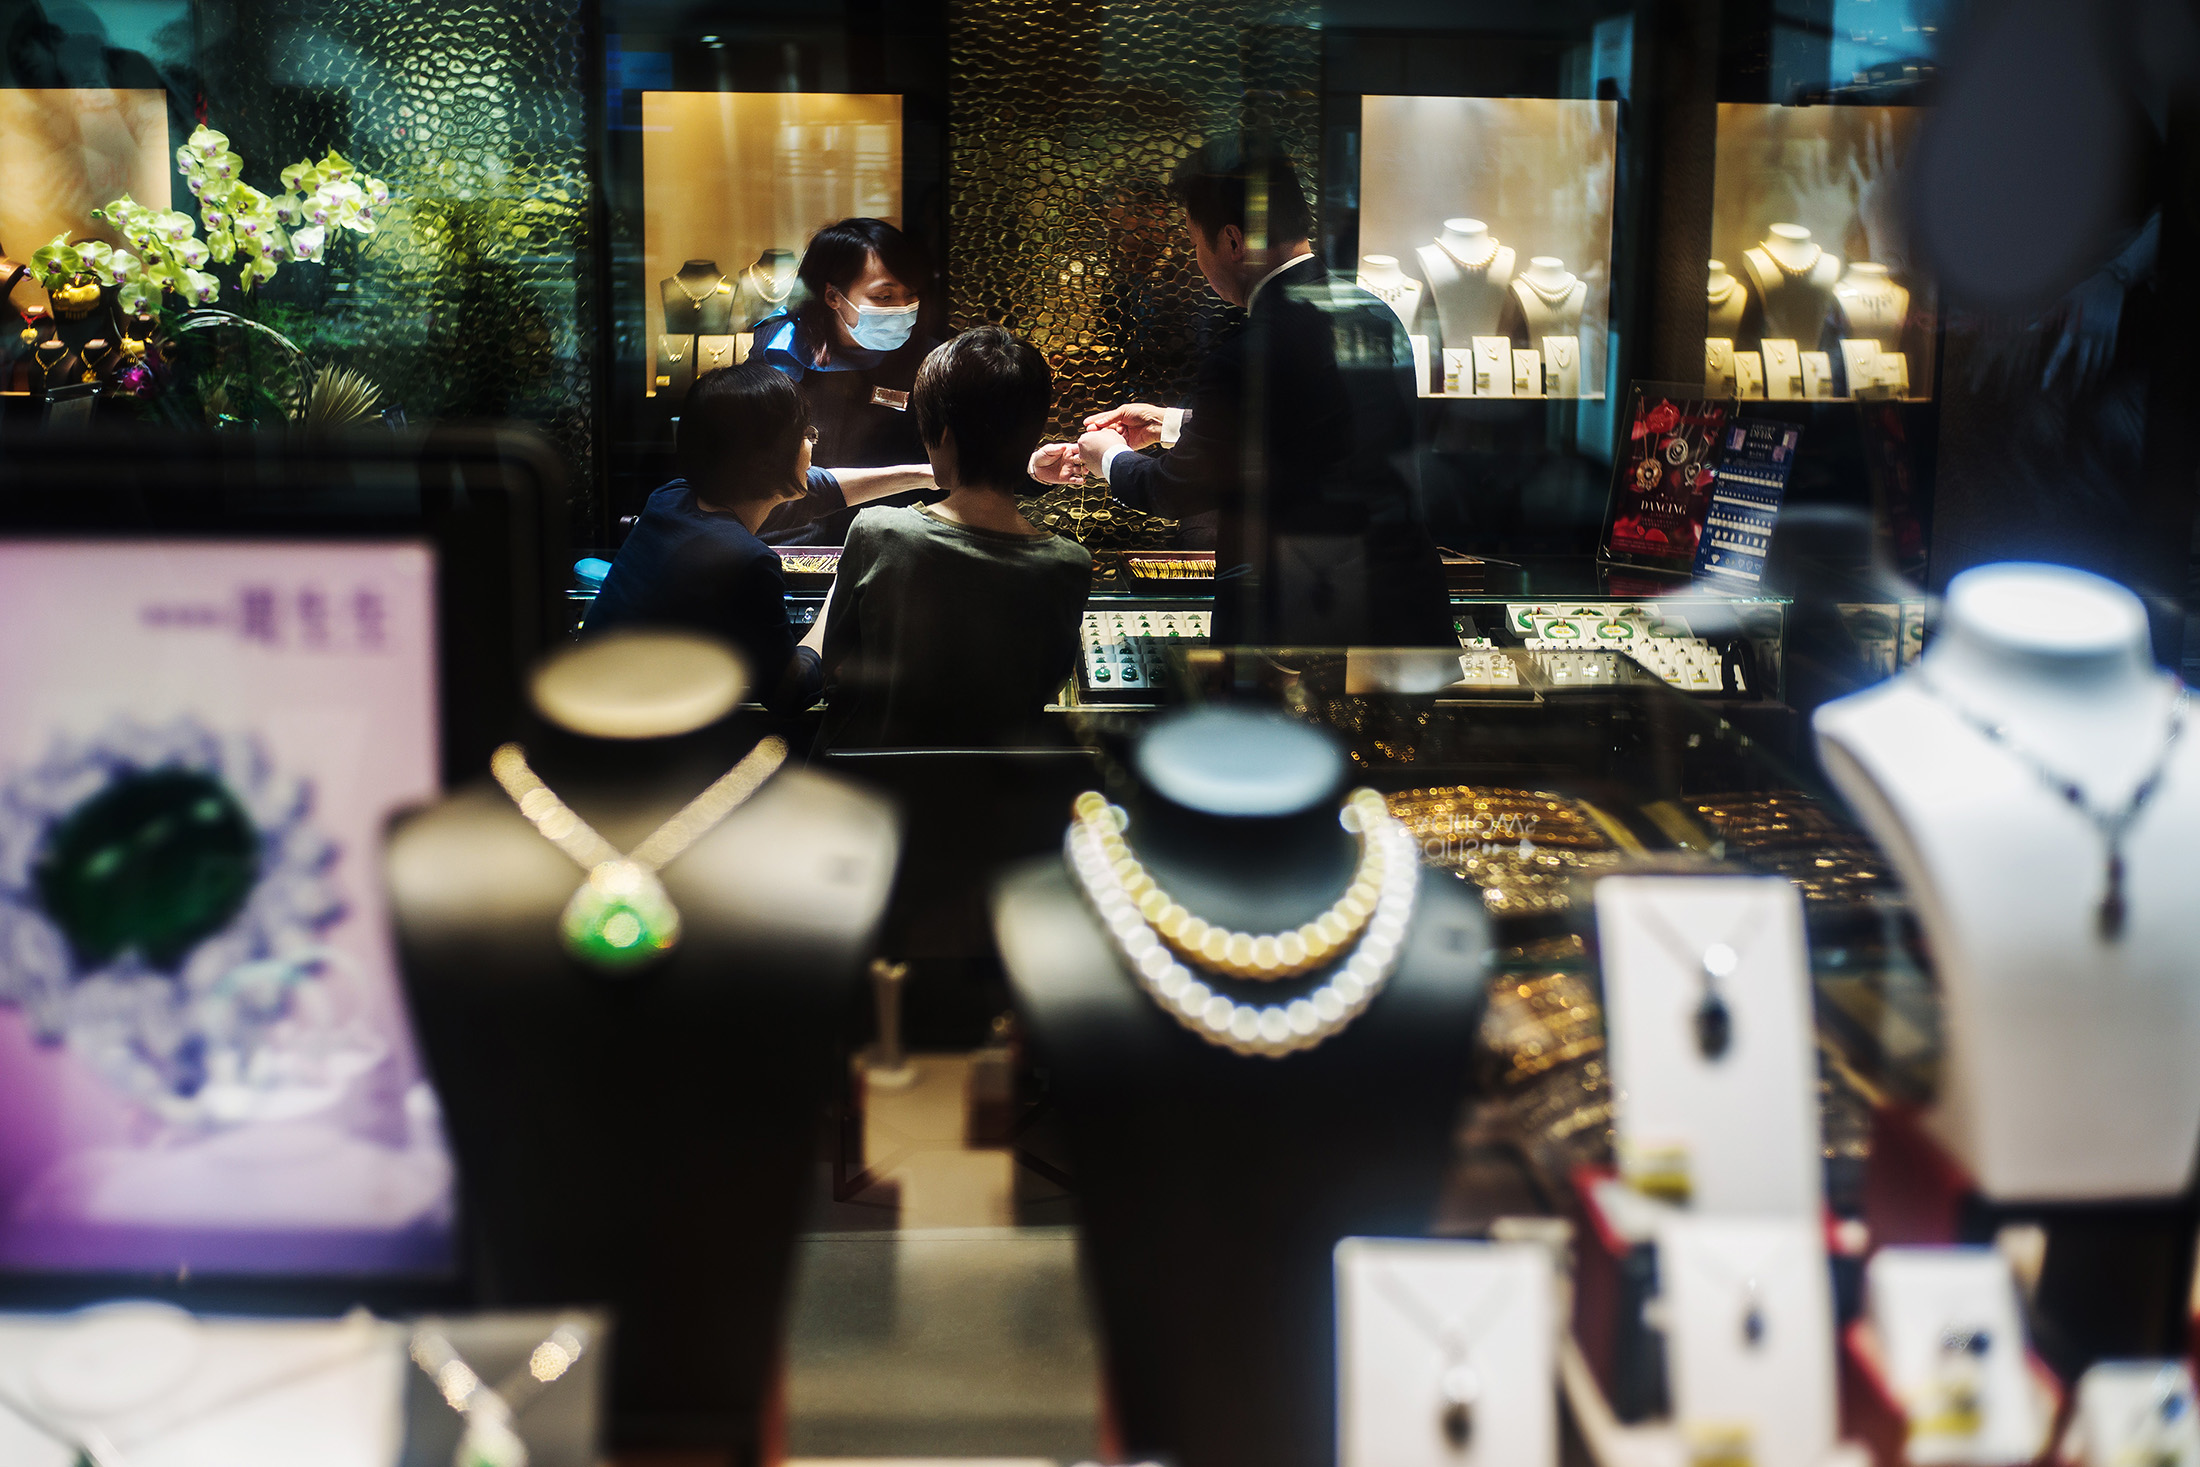 How to Buy Jewelry: An Expert Shares What You Are Doing Wrong - Bloomberg